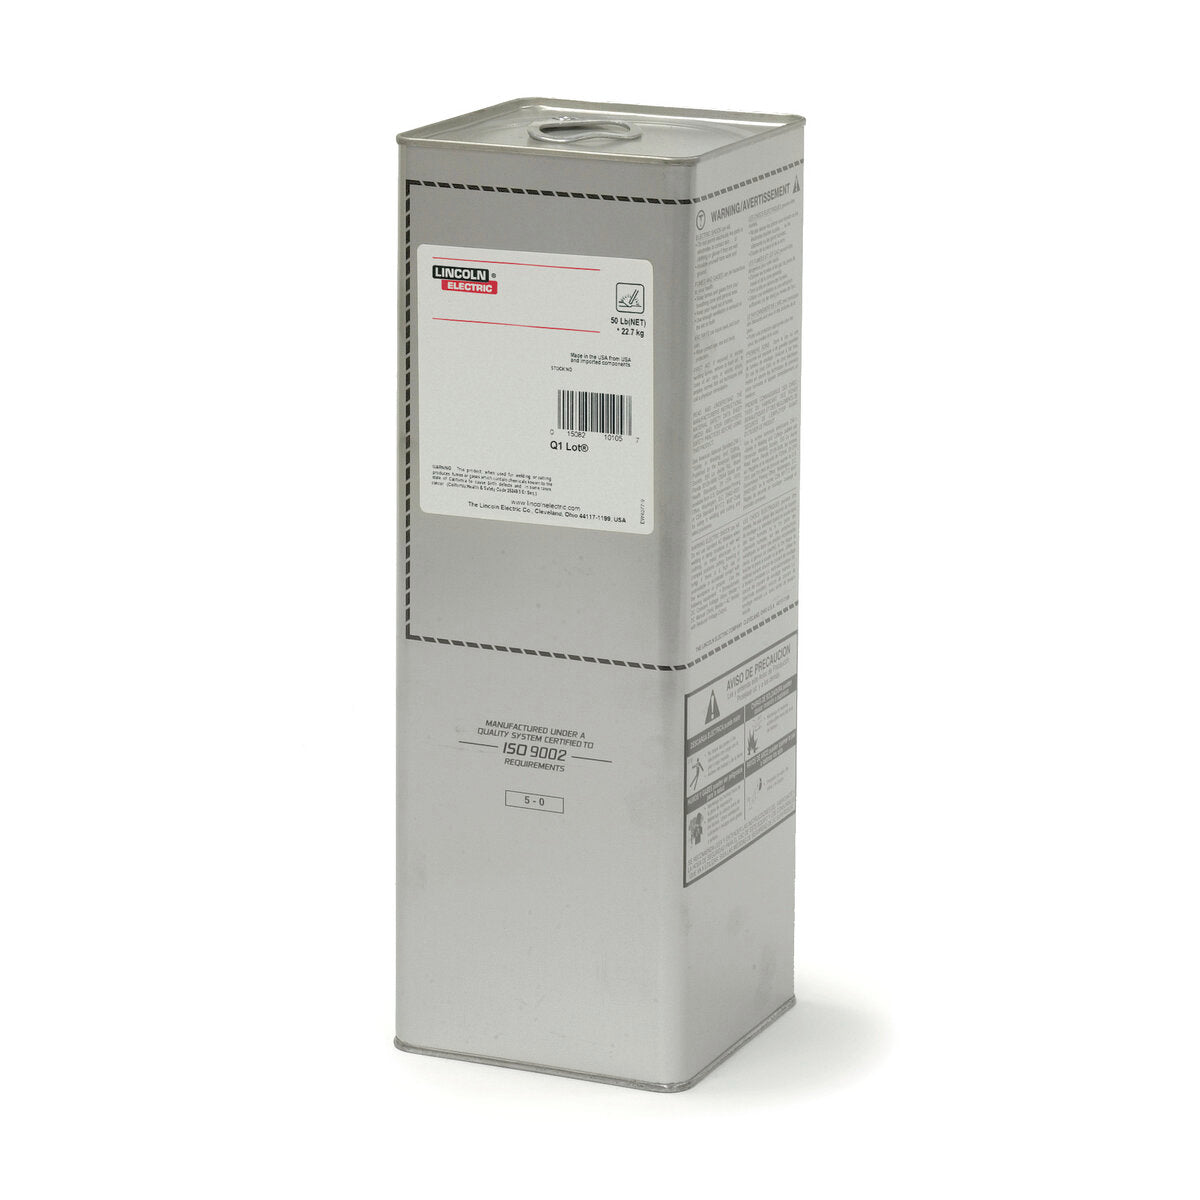 Lincoln Electric - Excalibur® 7028 Stick (SMAW) Electrode, 3/16x18 in, 50 lb Easy Open Can - ED032790